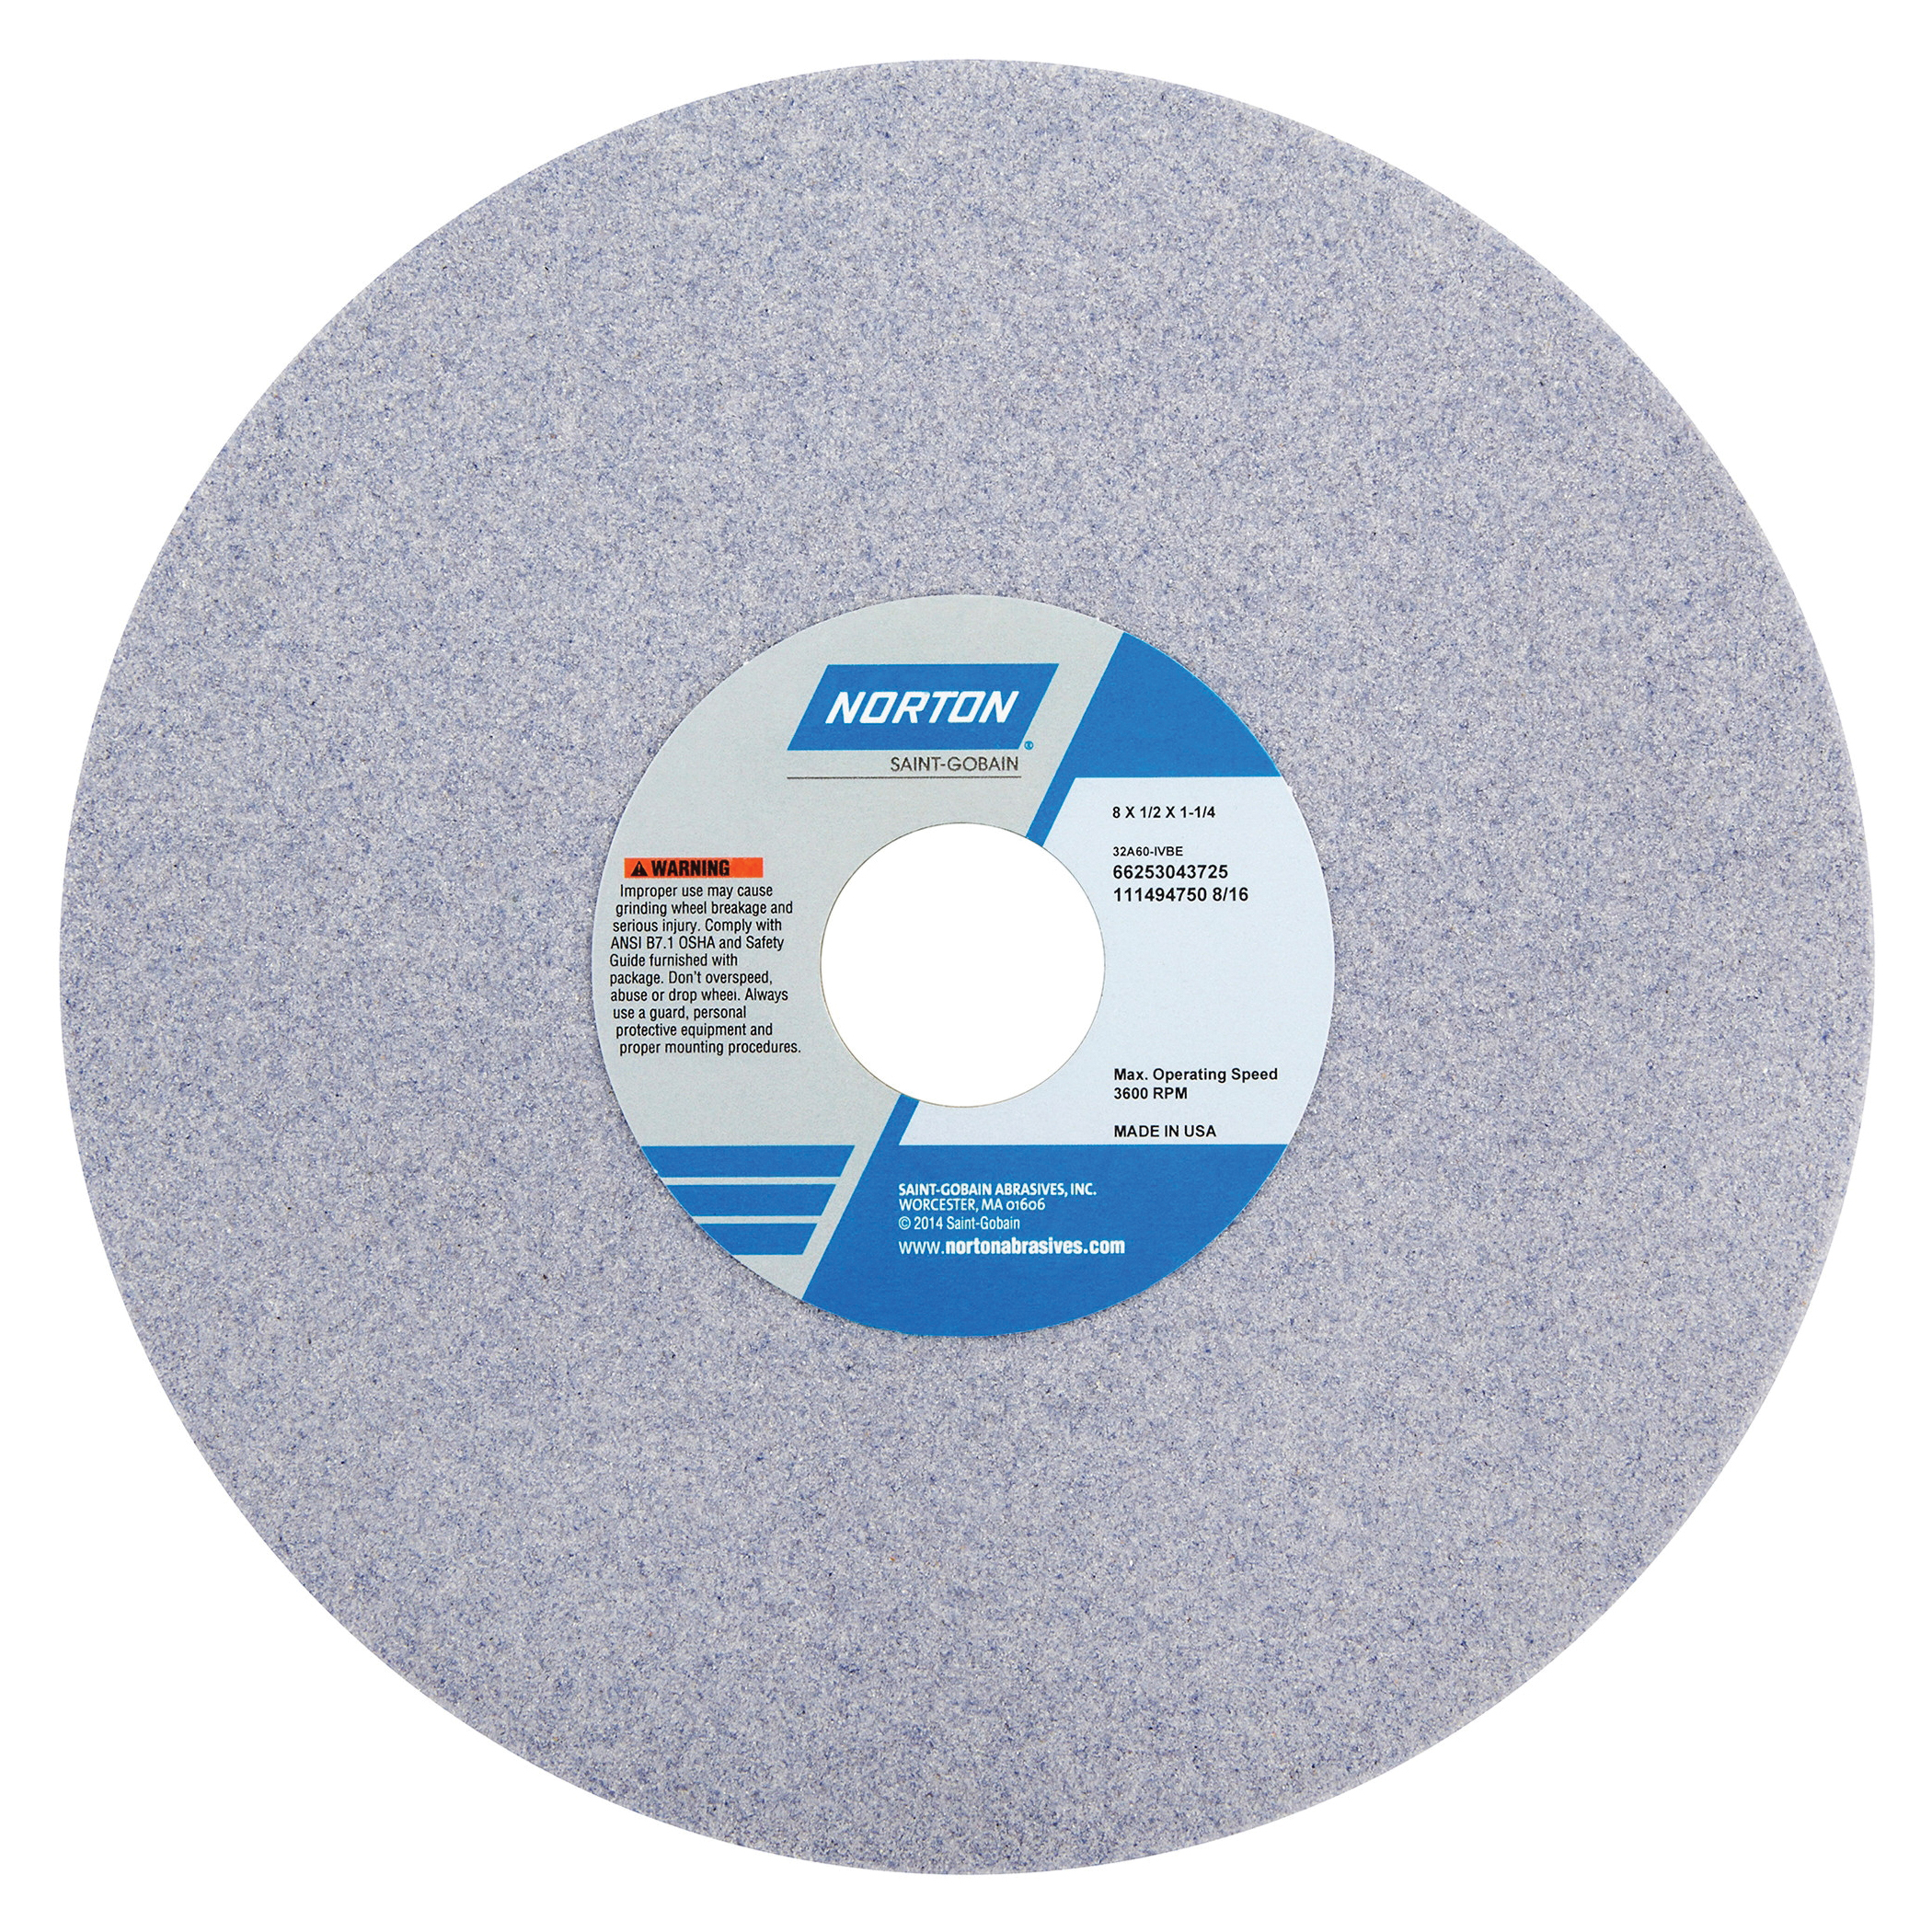 Norton® 66253043712 32A Straight Toolroom Wheel, 8 in Dia x 1/2 in THK, 1-1/4 in Center Hole, 46 Grit, Aluminum Oxide Abrasive